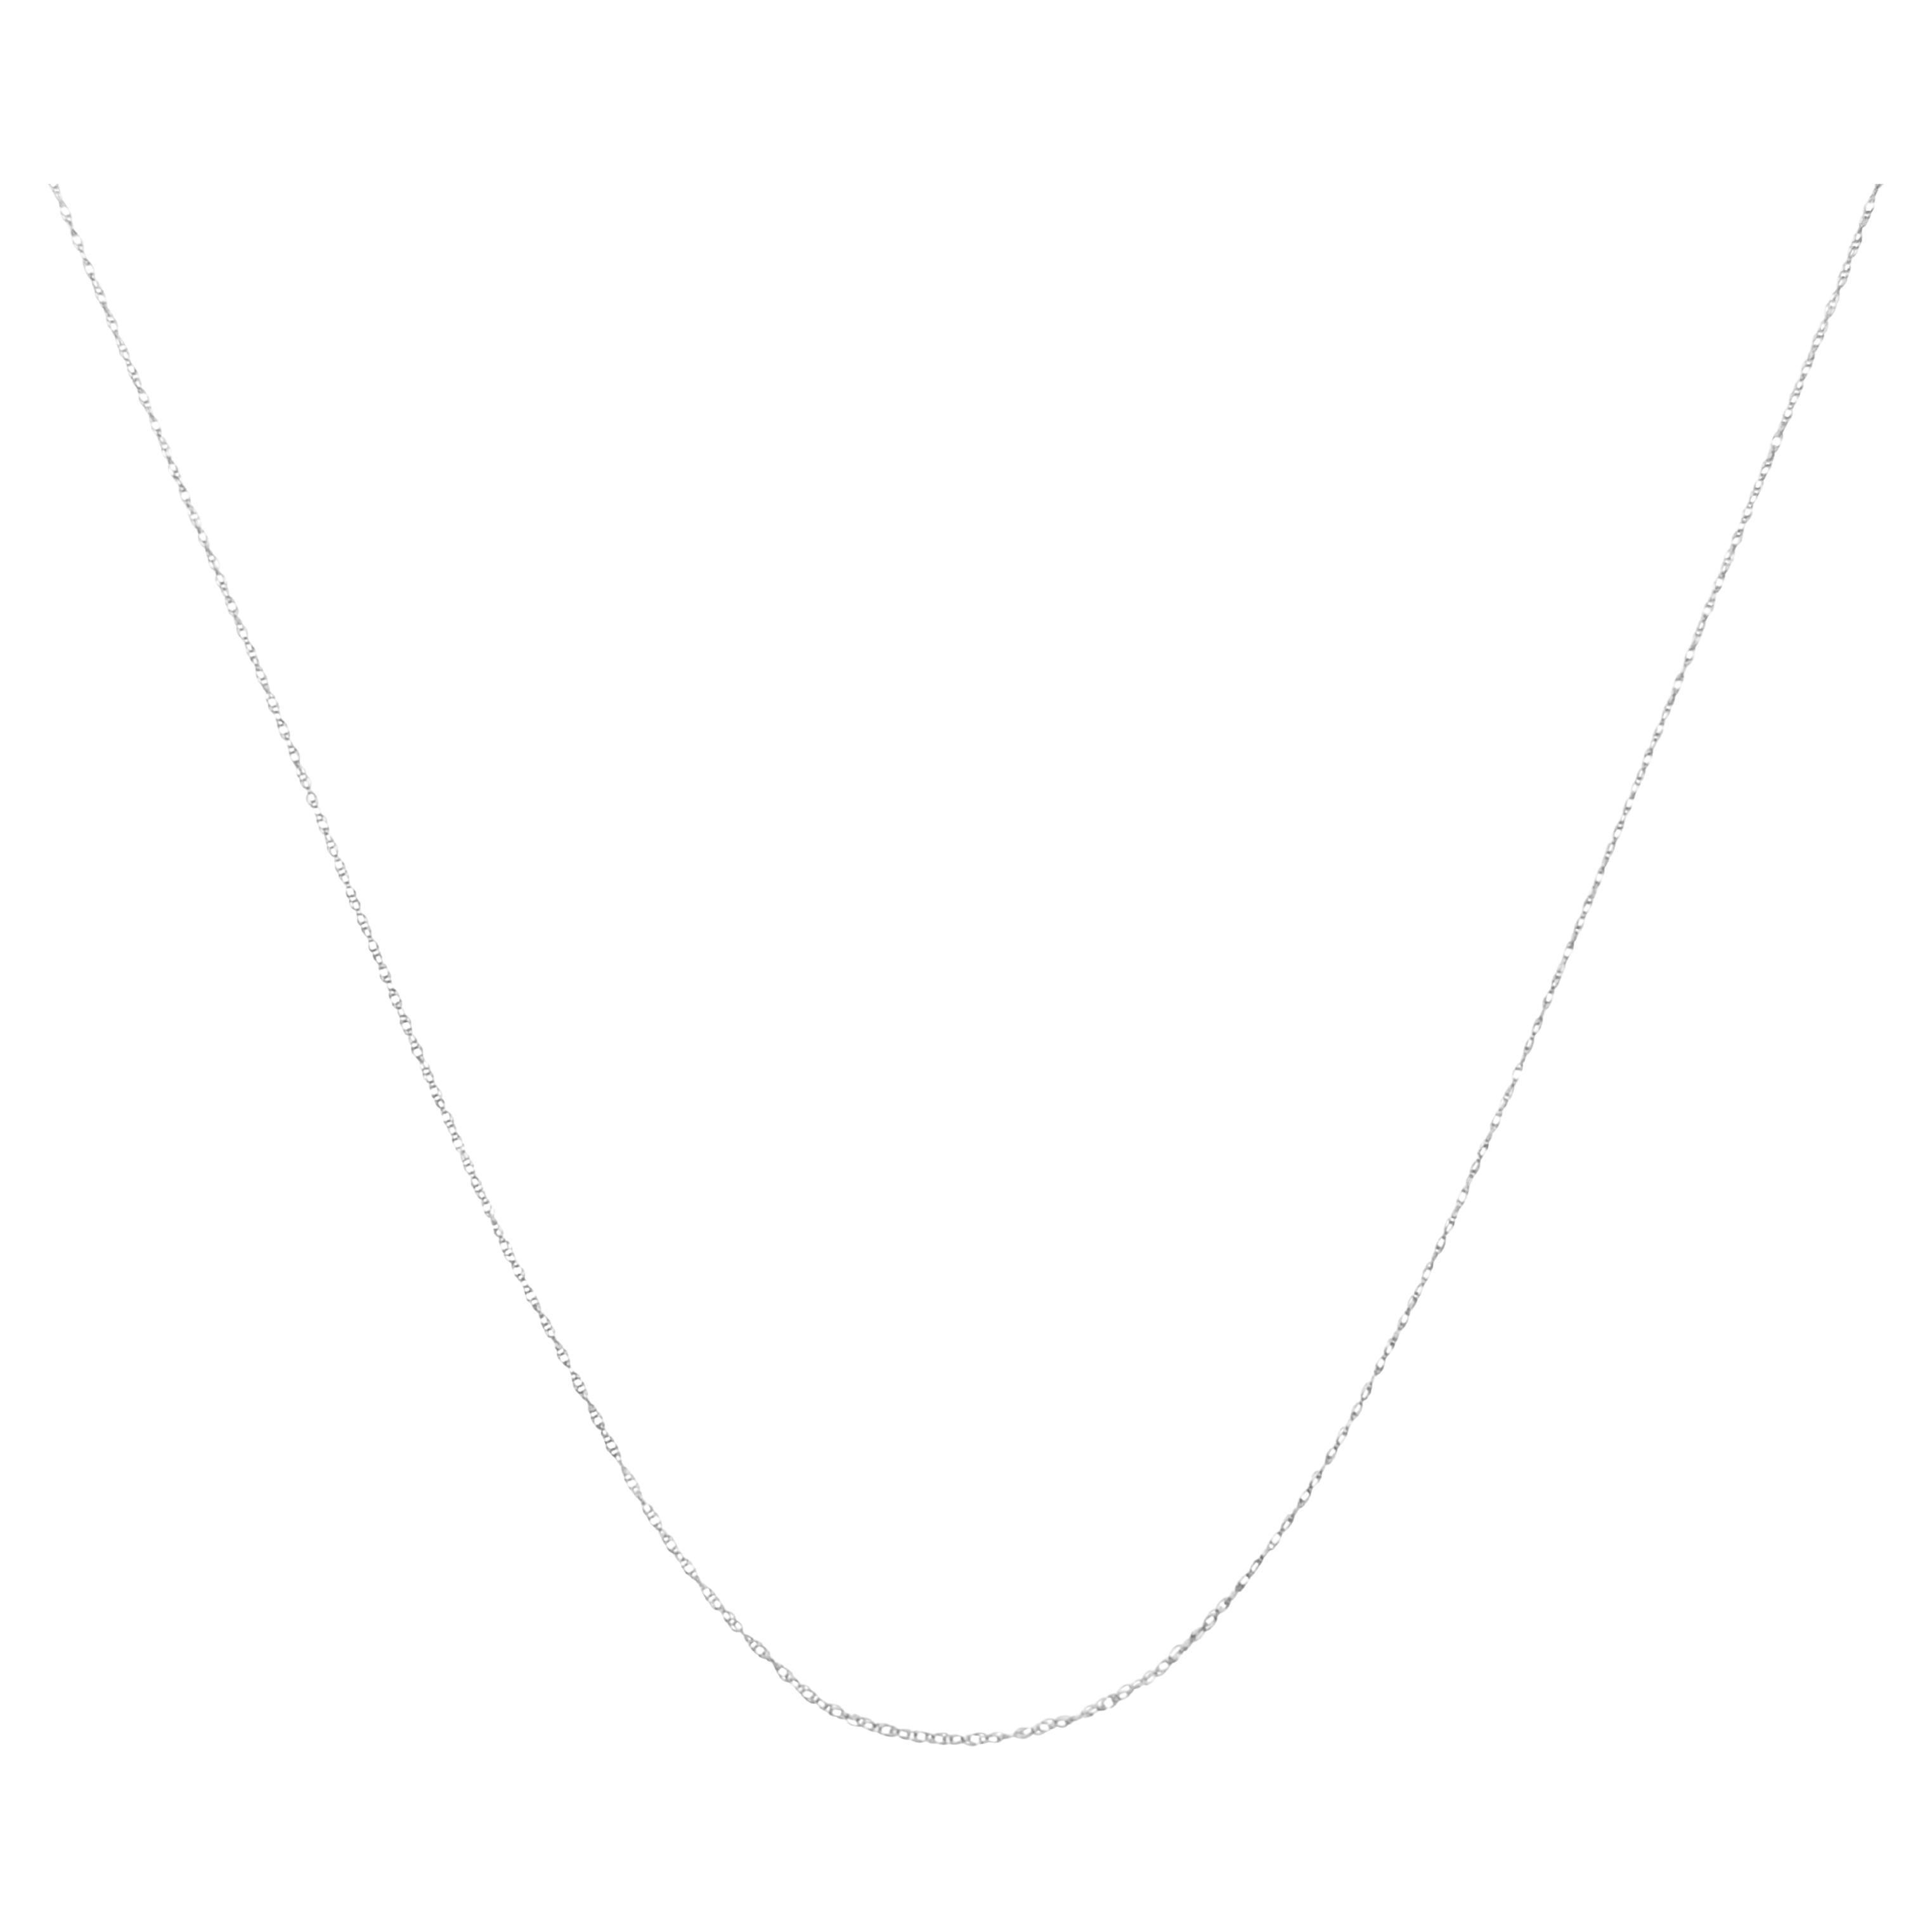 Solid 10K White Gold 0.5mm Rope Chain Necklace, Unisex Chain For Sale